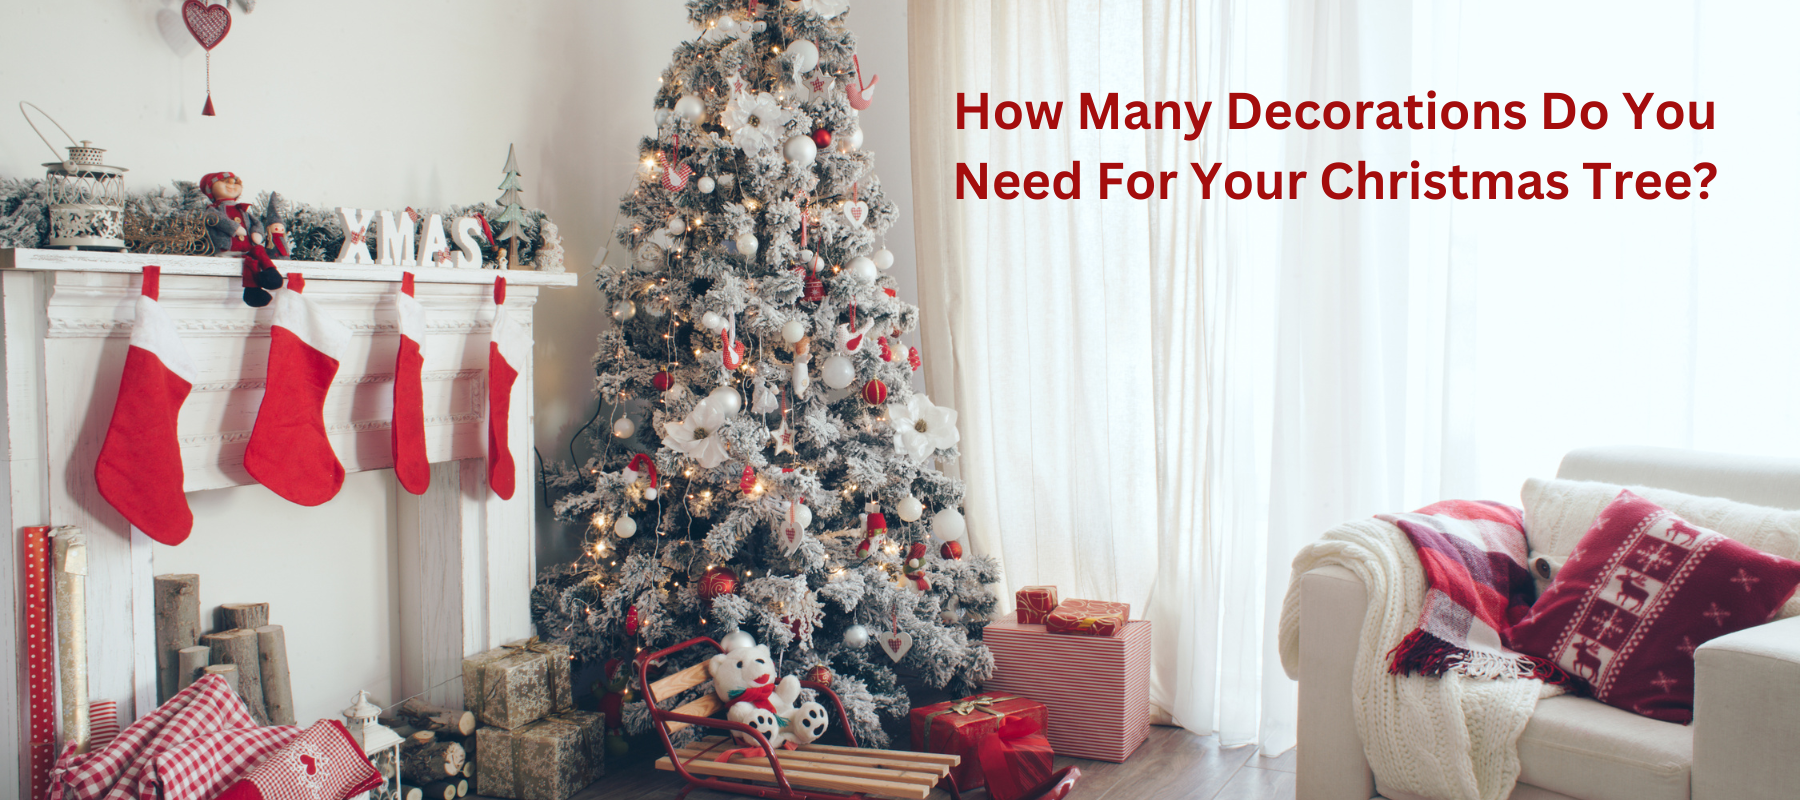 How Many Decorations Do You Need For Your Christmas Tree?